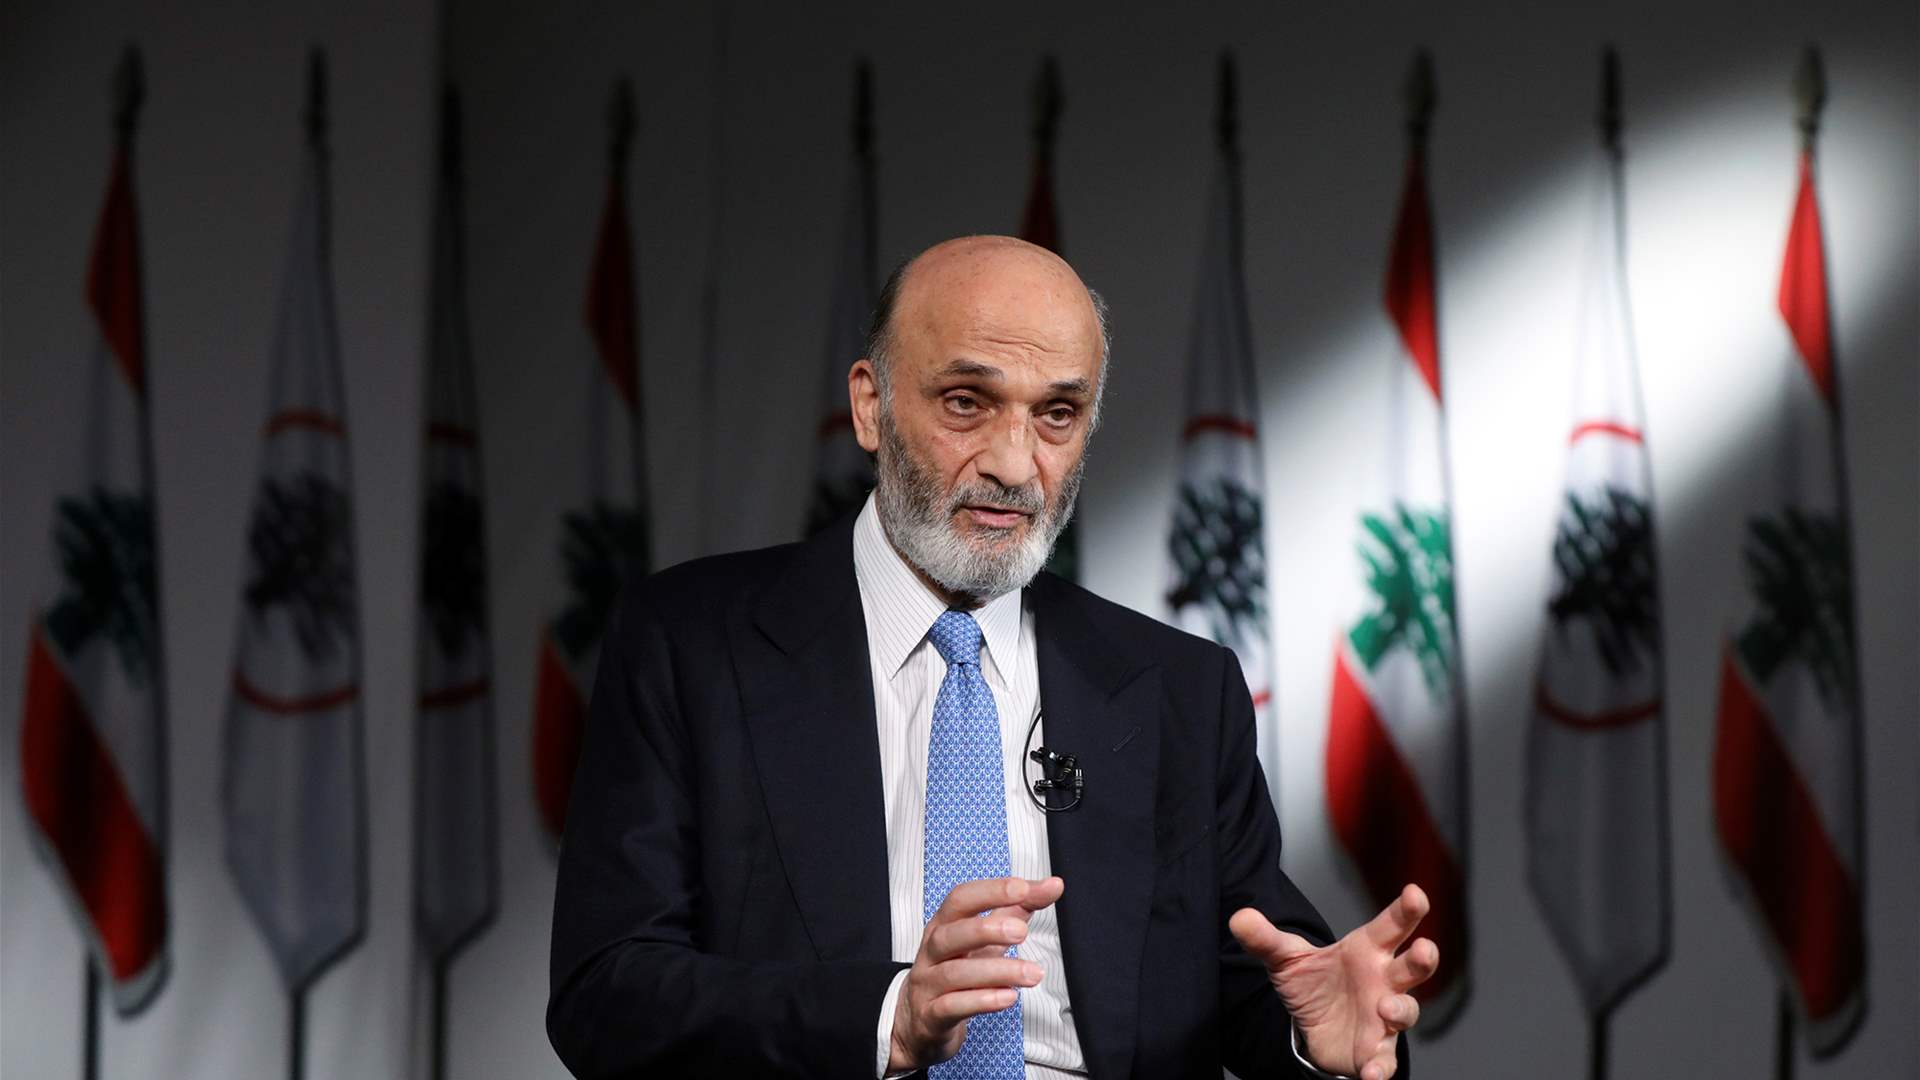 Geagea calls for border stability: Reinforcing Resolution 1701 and Lebanese Army&#39;s role